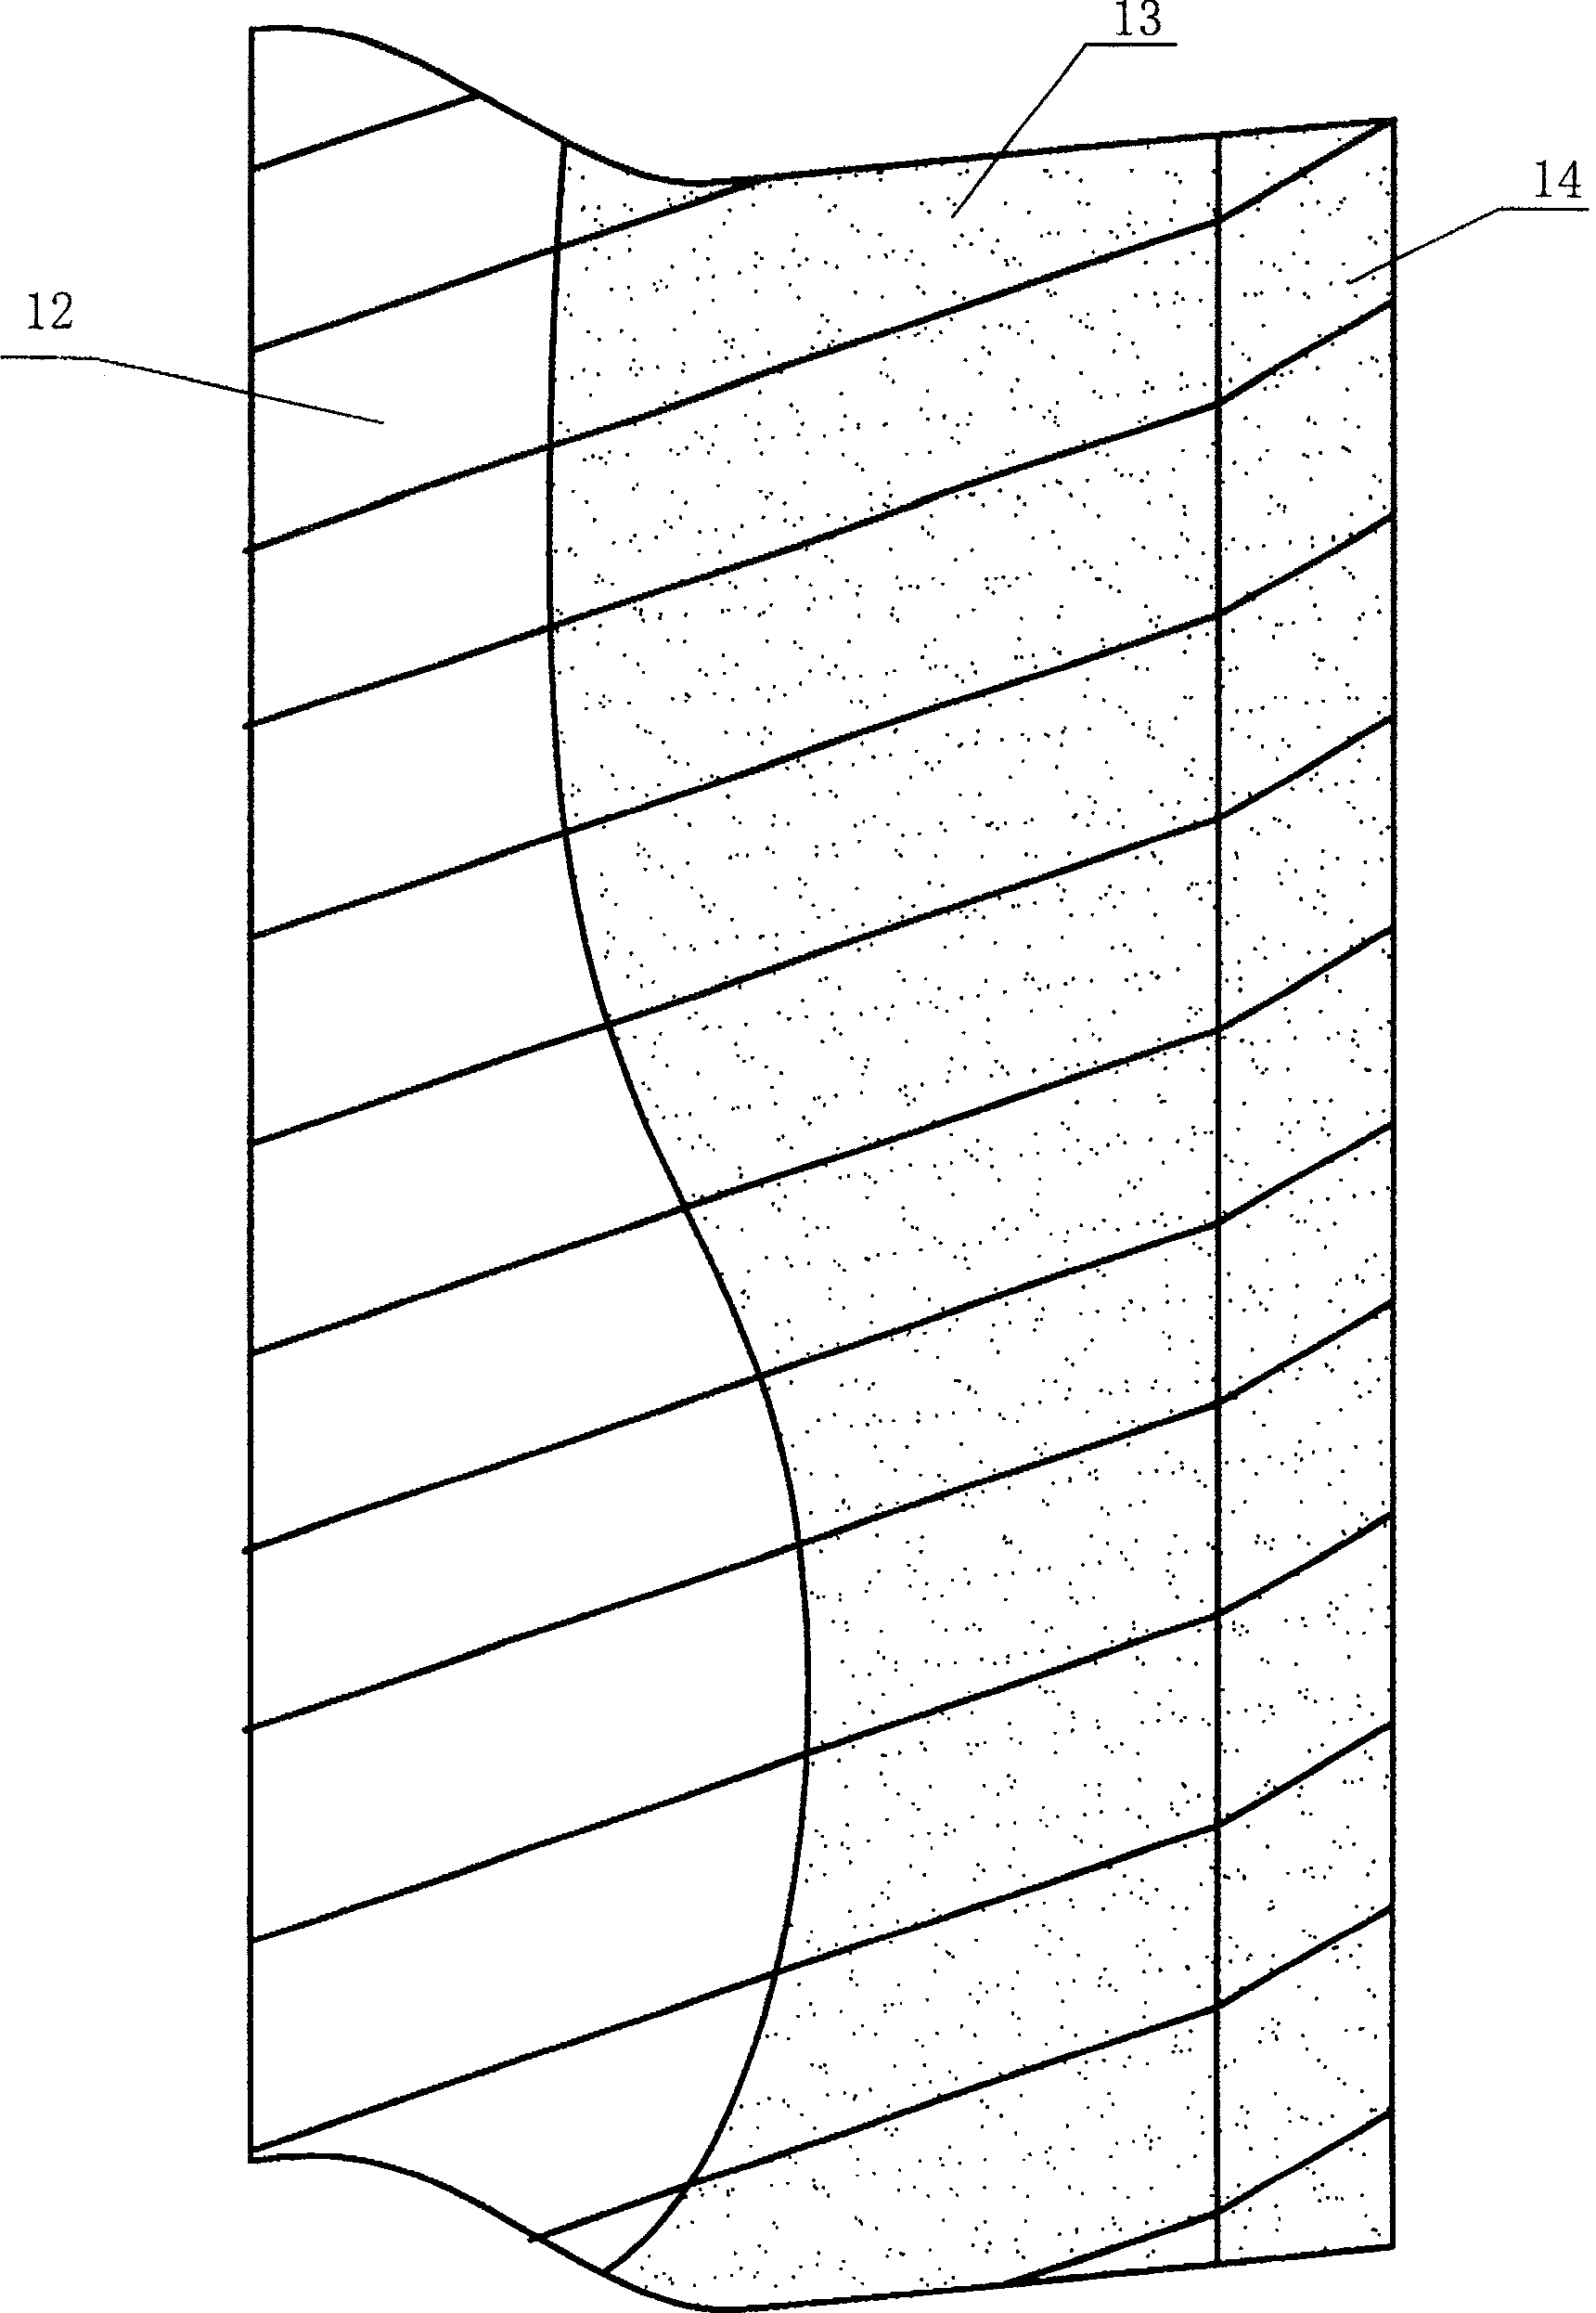 Enhancement ultra-high molecular weight polyethylene wound pipe and manufacture method therefor